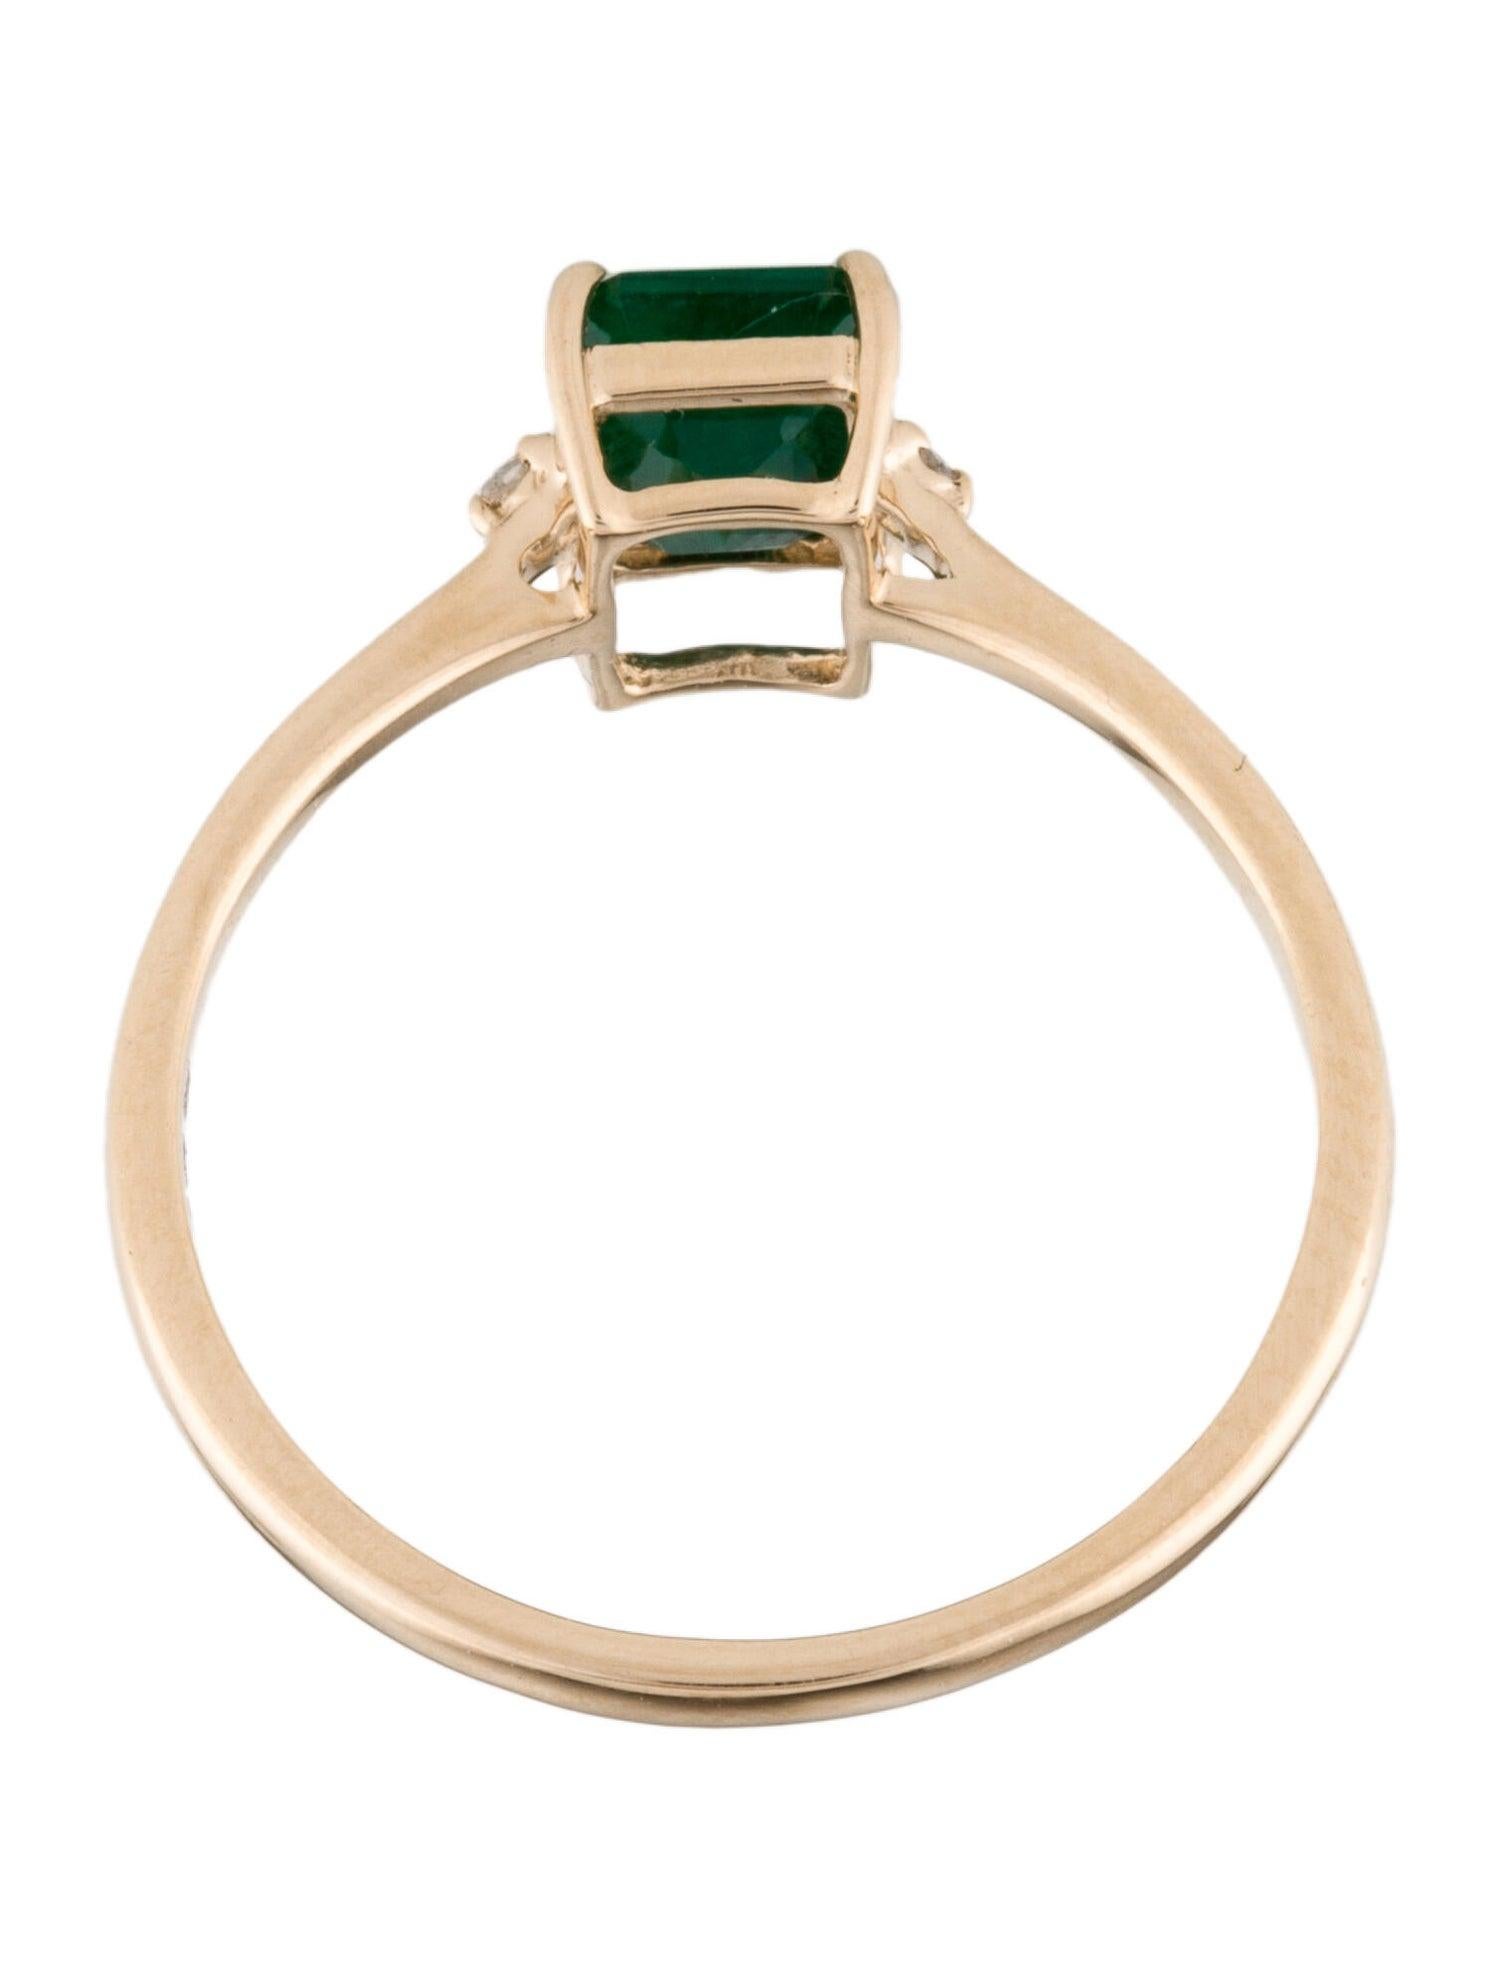 14K Yellow Gold Emerald Cut Emerald & Diamond Cocktail Ring Size 7 For Sale 1